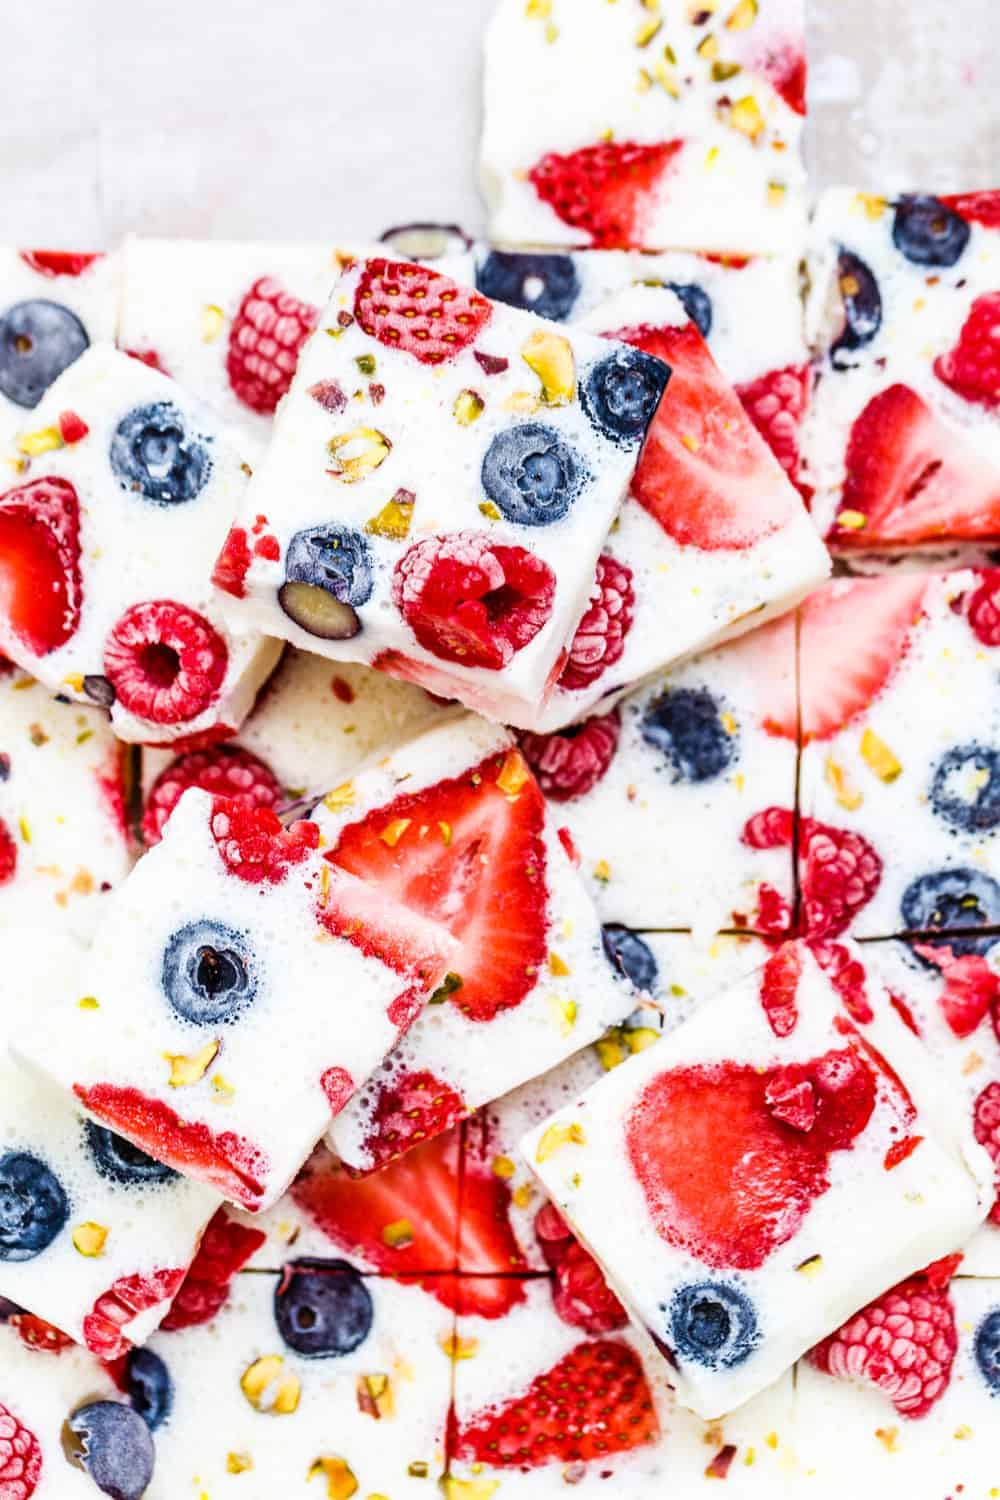 Frozen yogurt bark topped with mixed berries and crushed pistachios - super easy, delicious and a refreshing no-cook recipe that is perfect for breakfast, snack or dessert!